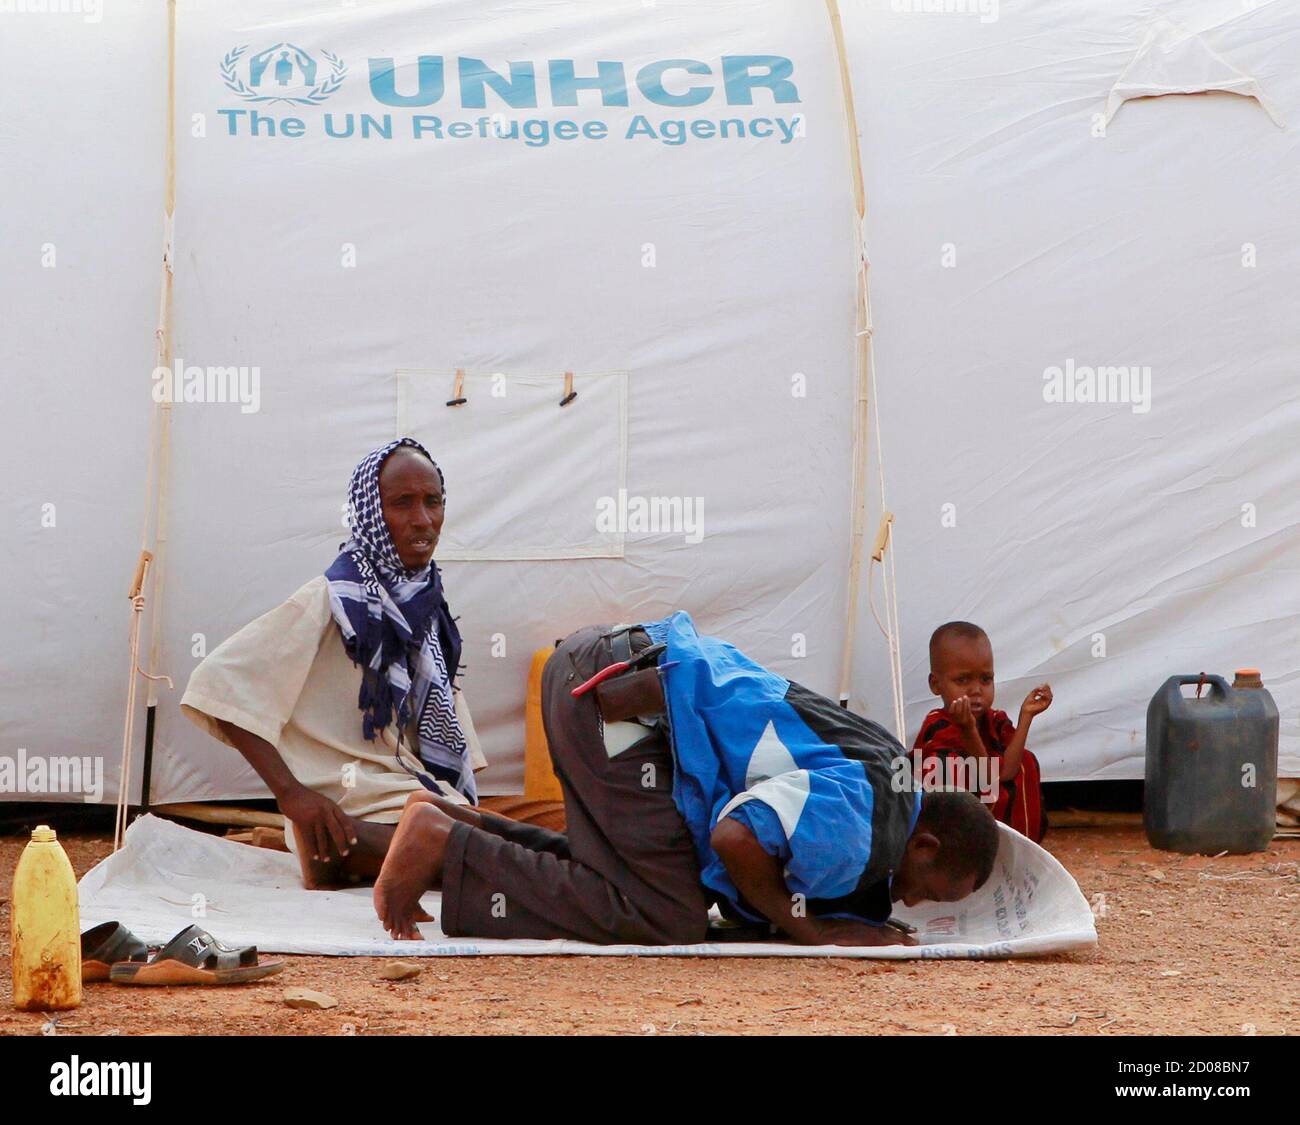 A Somali refugee man prays outside his tent at the Kobe refugee camp 60 km (37.3 miles) from Dolo Ado near the Ethiopia-Somalia border, August 10, 2011. The U.N. refugee agency and a government agency have established four camps along the Ethiopian border with Somalia to accommodate a refugee population that now exceeds 120,000 most of whom are victims of drought and famine; the worst in decades, and has affected about 12 million people across the Horn of Africa. REUTERS/Thomas Mukoya (ETHIOPIA - Tags: ENVIRONMENT DISASTER RELIGION) Stock Photo